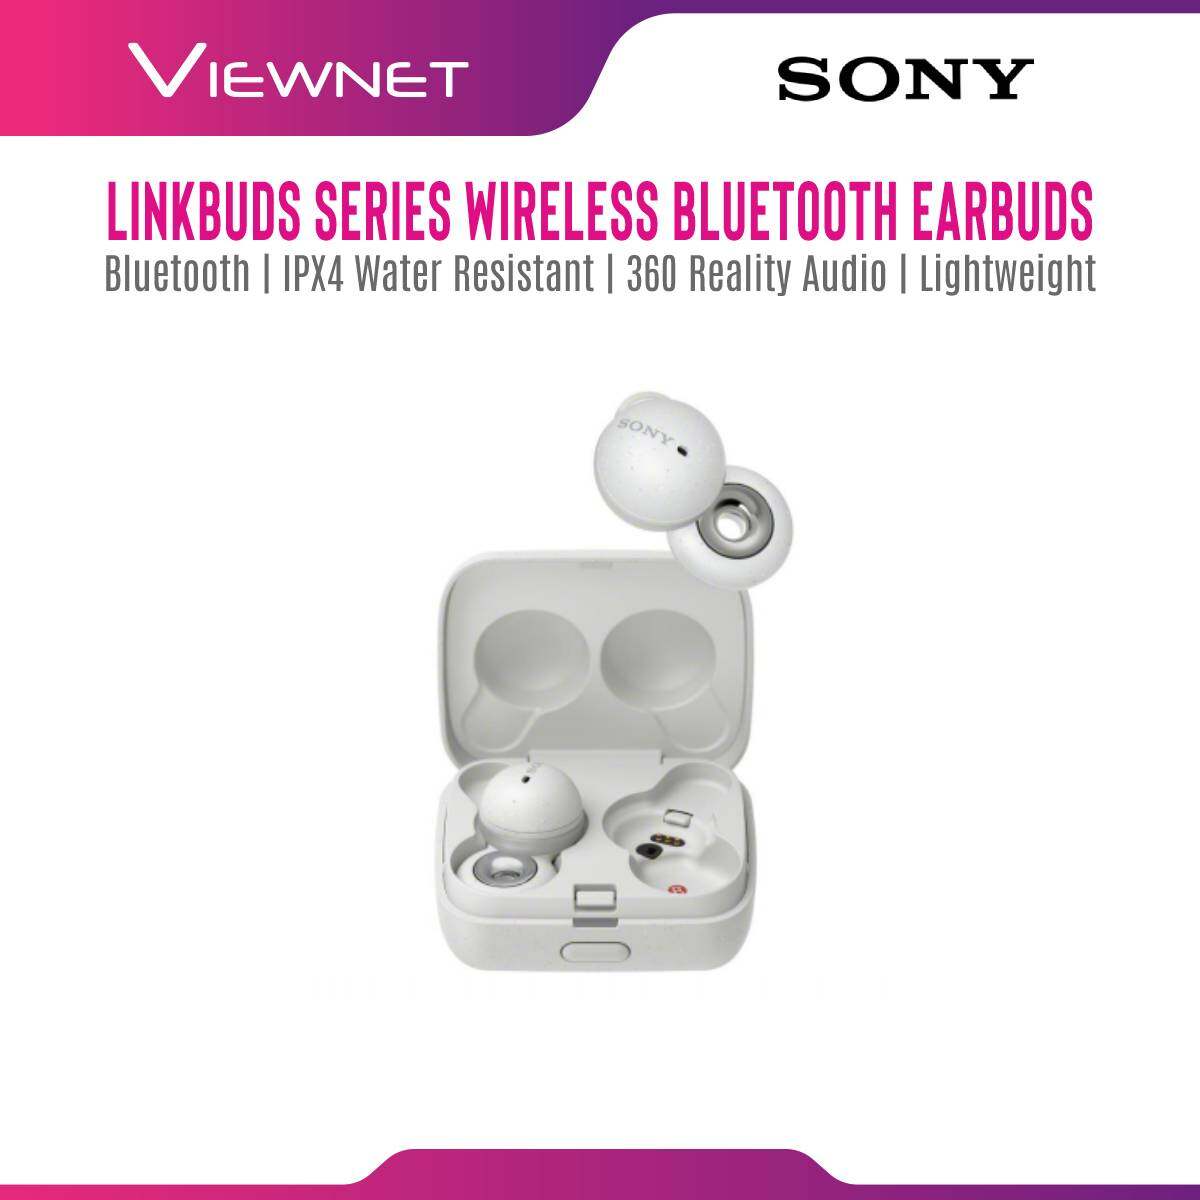 [PRE-ORDER] [NEW LAUNCH] Sony LinkBuds Series BLuetooth Wireless Earbuds with IPX4 Water Resistant , Lightweight , 360 Reality Audio (ETA: 2022-03-20)